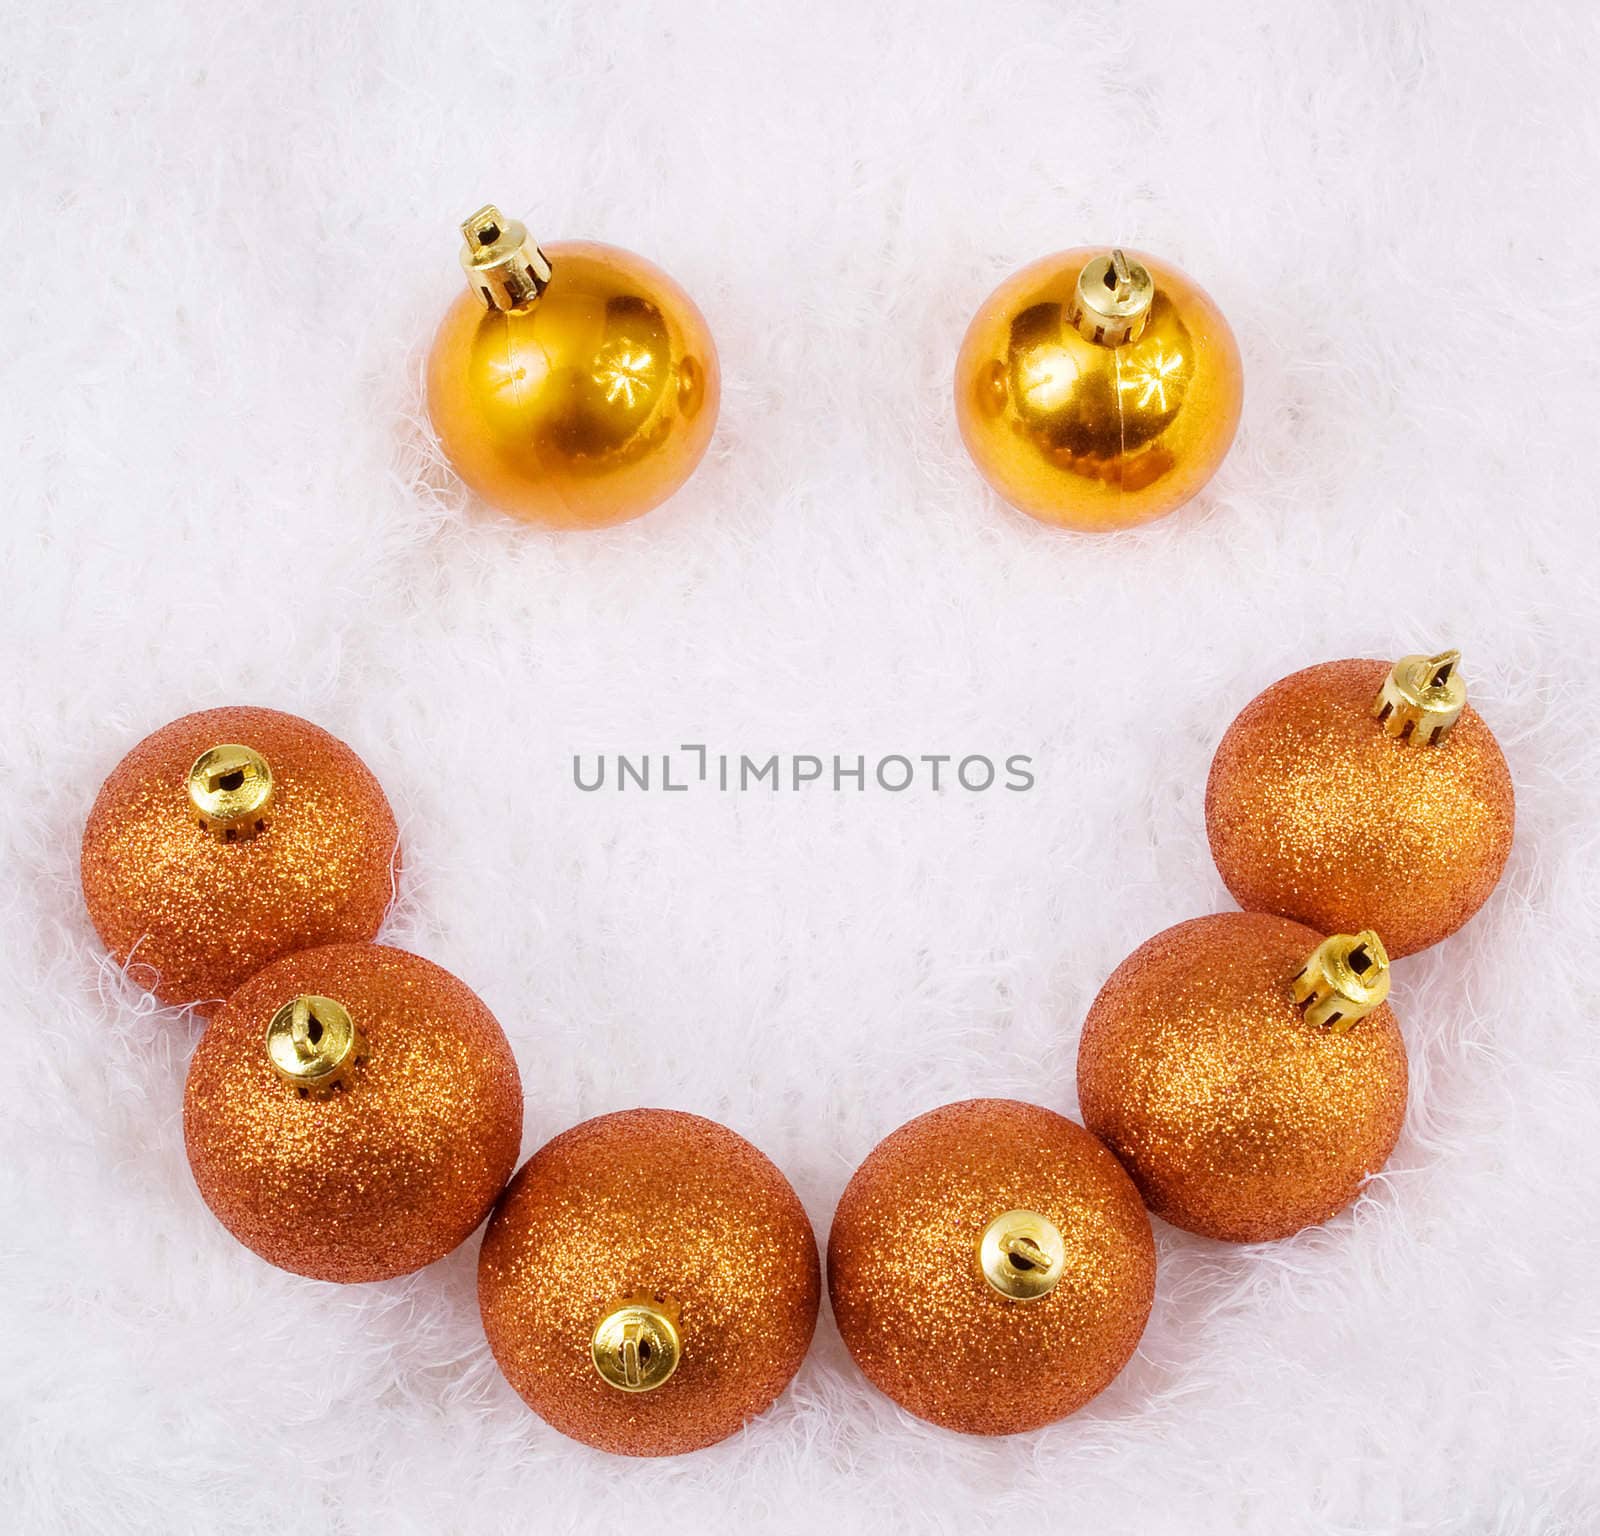 Christmas golden brightly spheres on the white fur